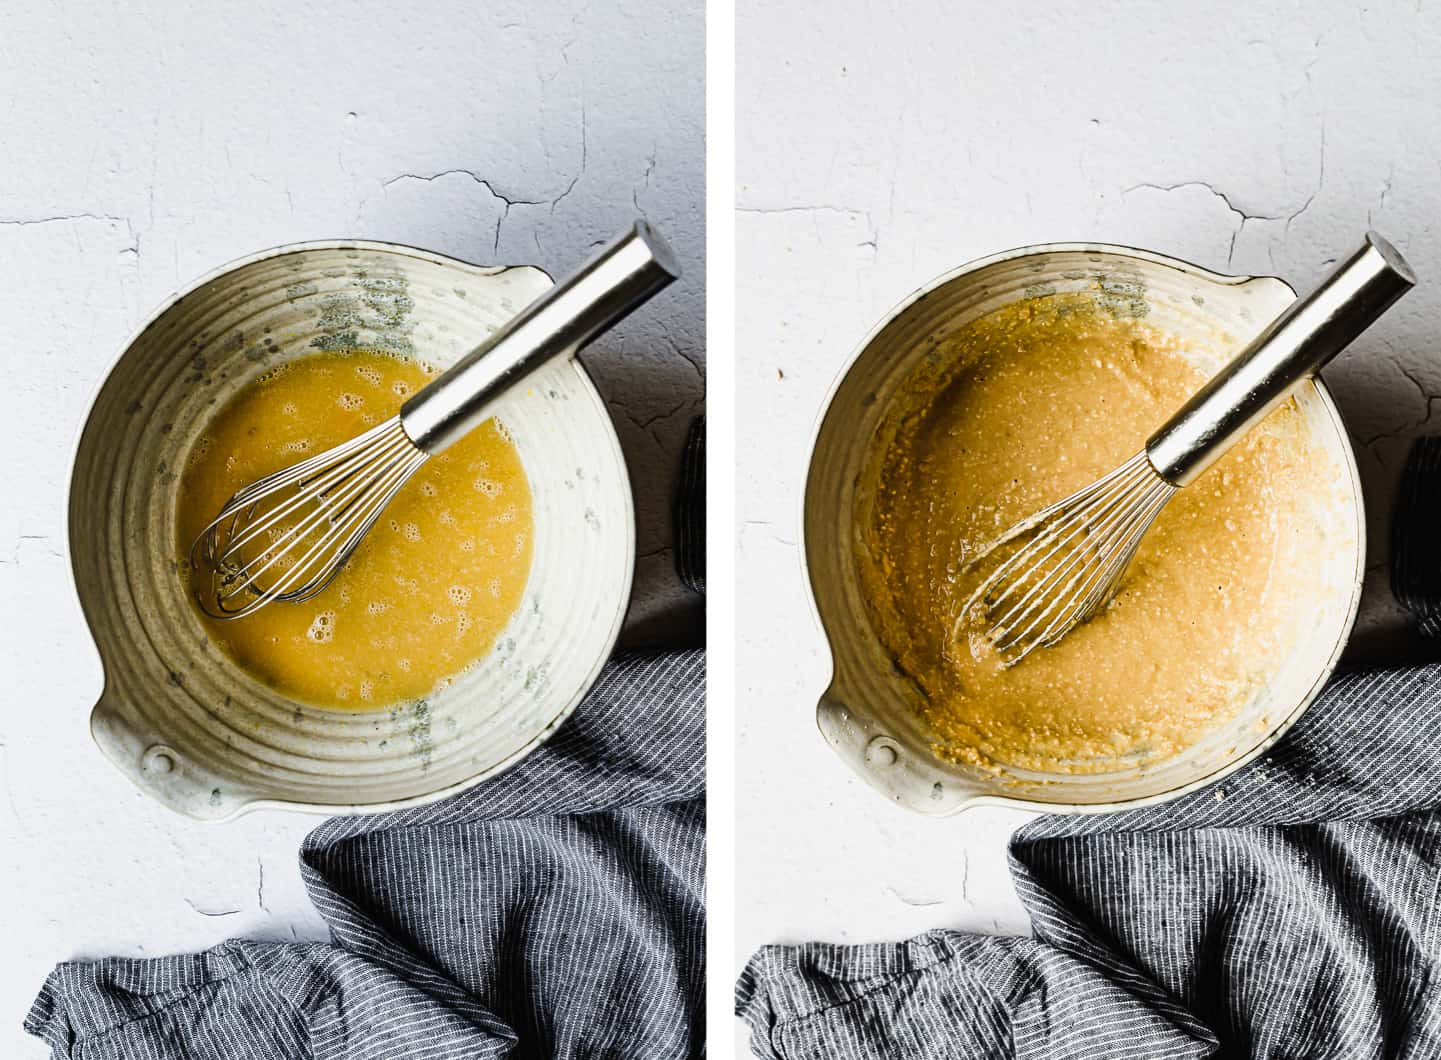 zucchini bread batter in a large mixing bowl with a metal whisk